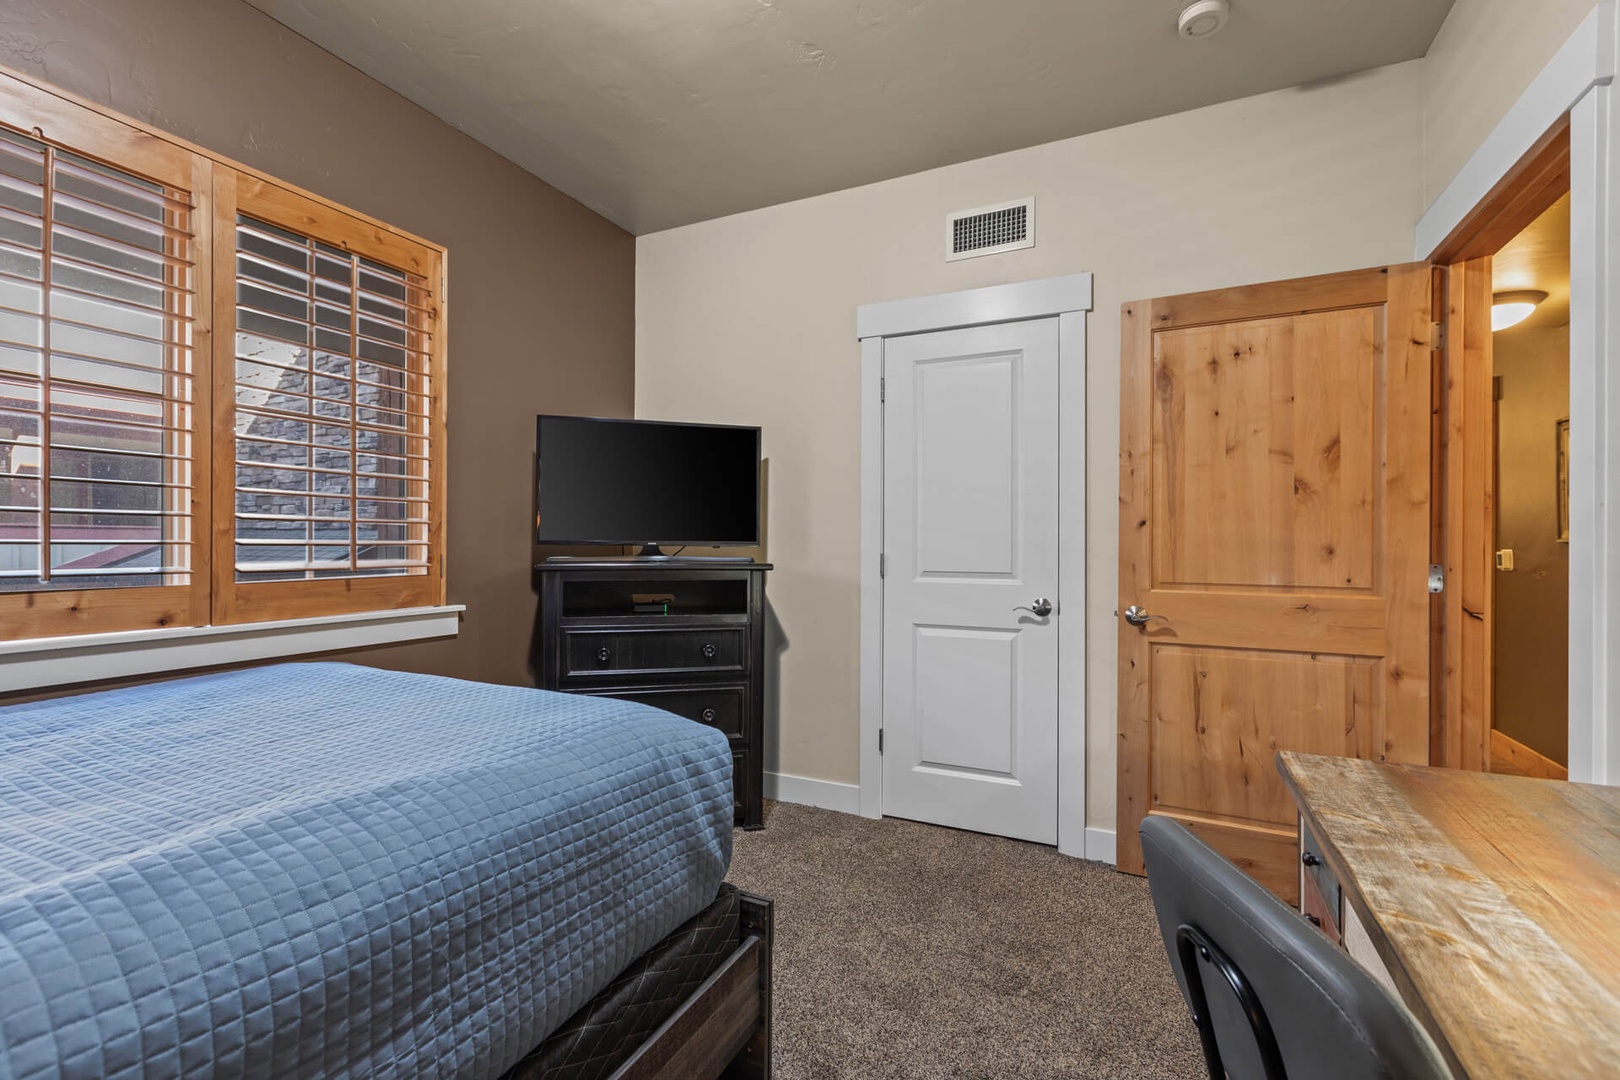 Bear Hollow Lodges 1304: The third bedroom closet offers more space to store your gear.